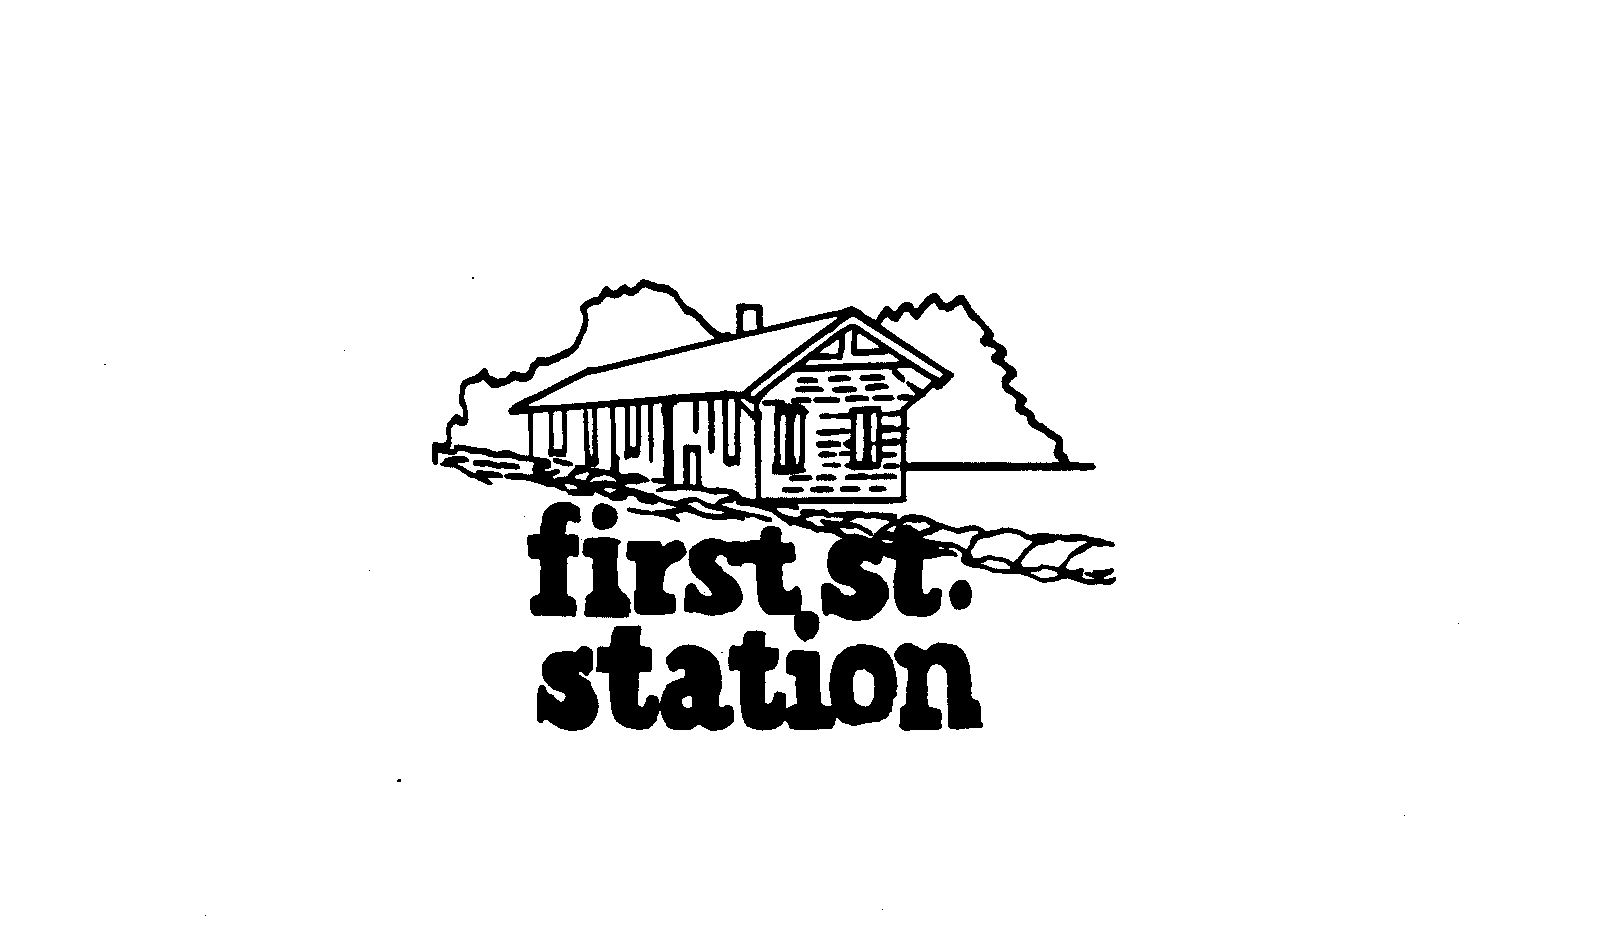  FIRST ST. STATION